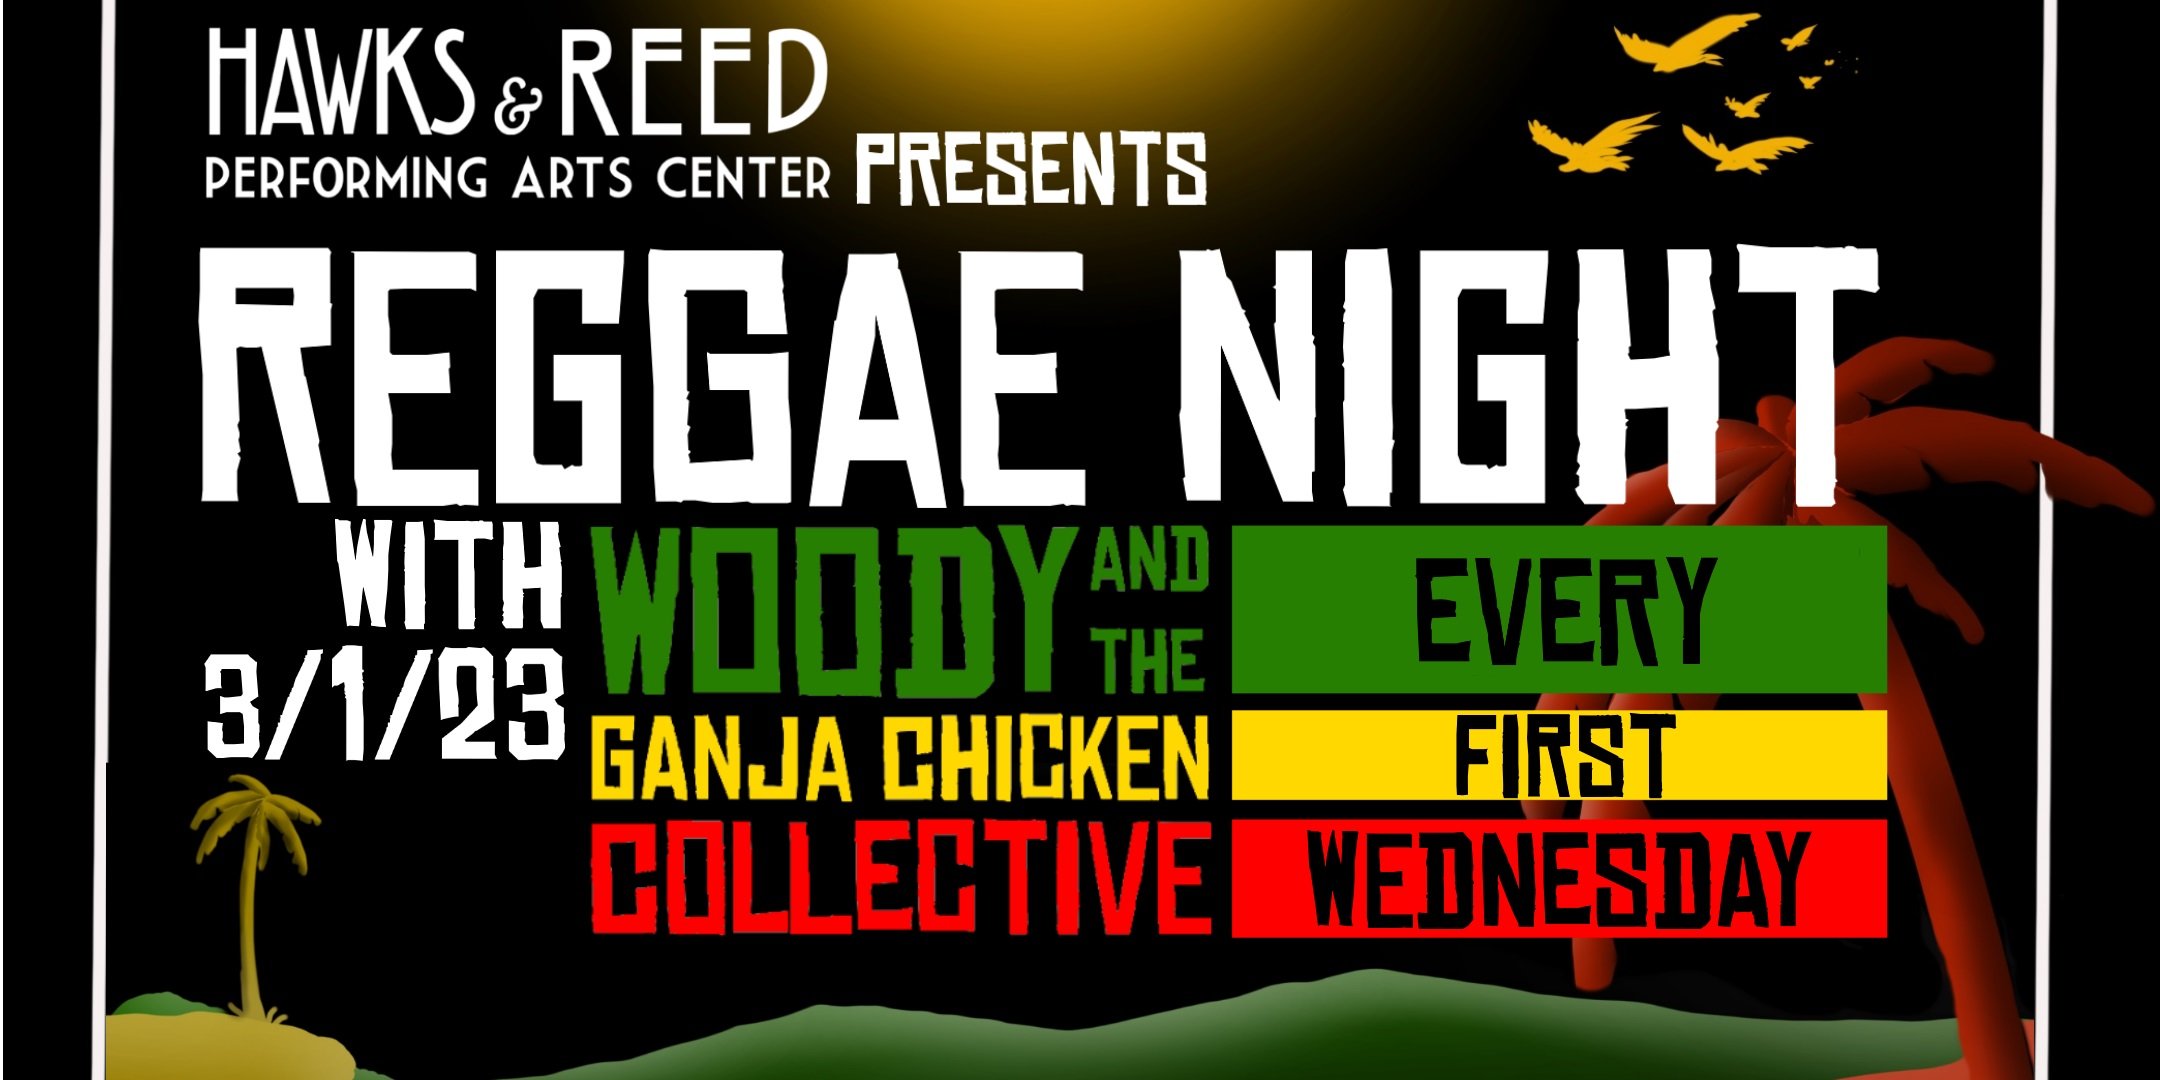 Reggae Night with Woody and the Ganja Chicken Collective